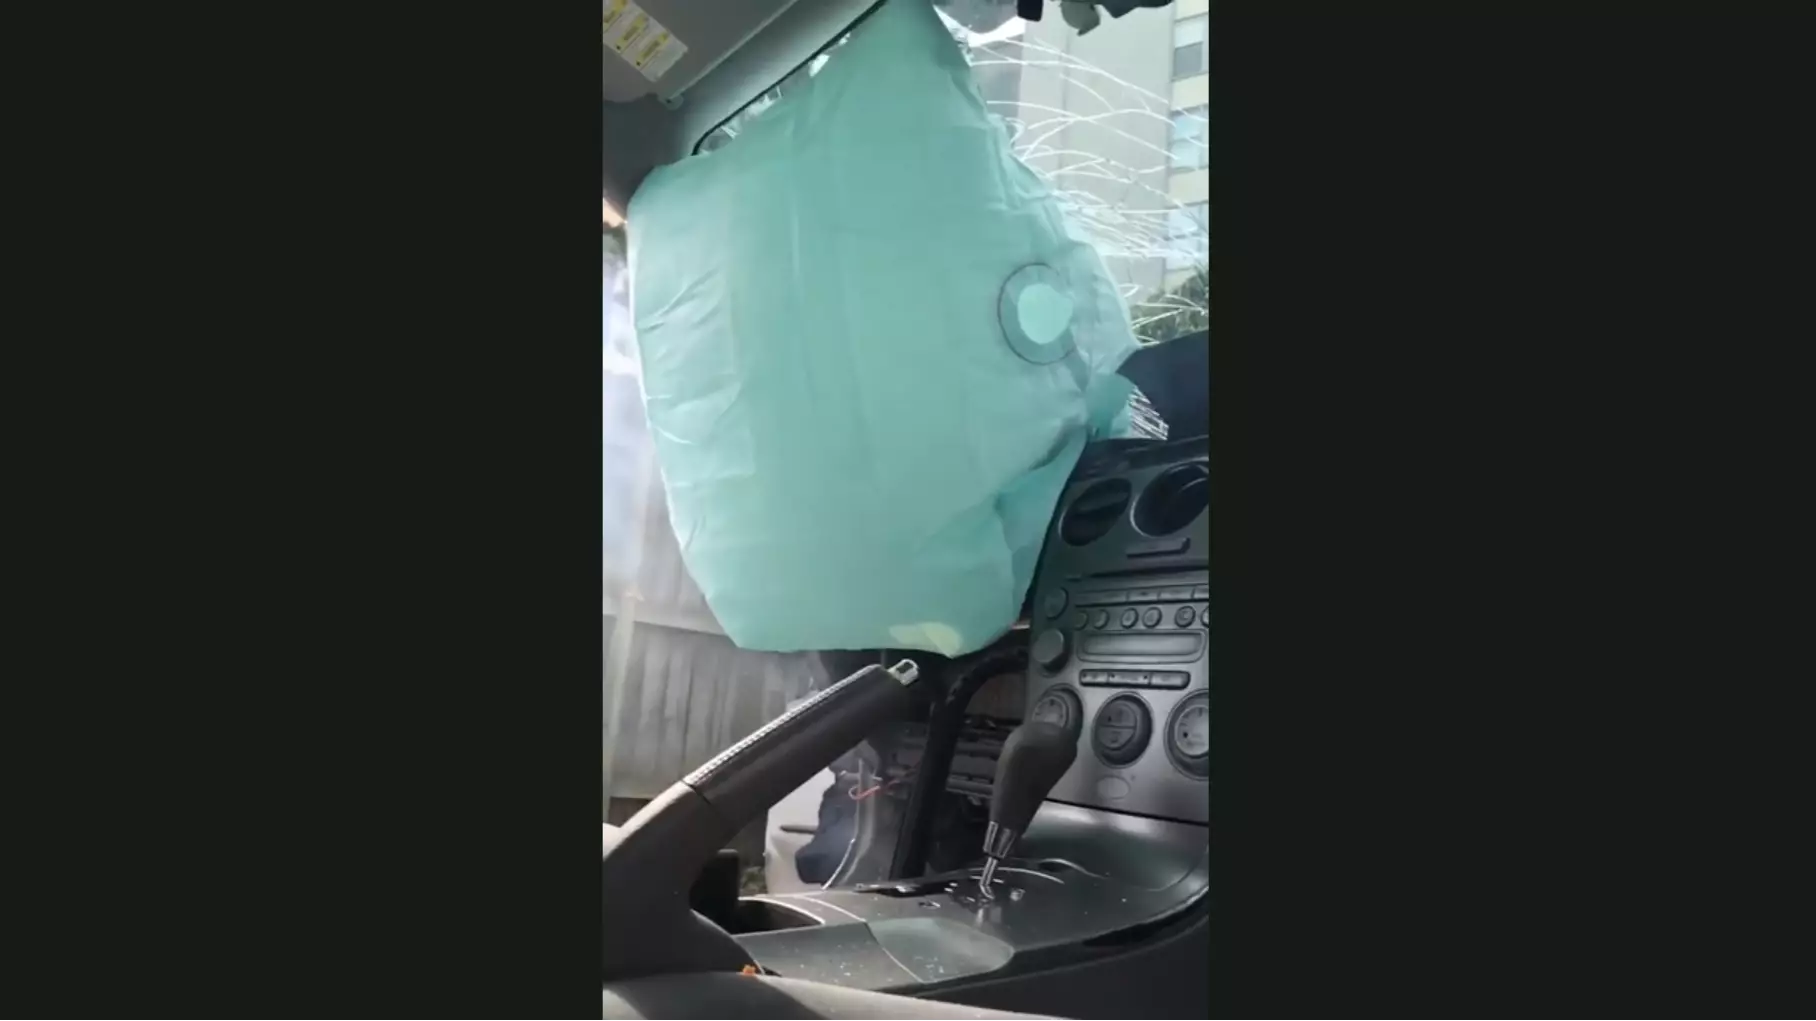 Video Shows The Danger Of Putting Feet Up On Car Dashboard